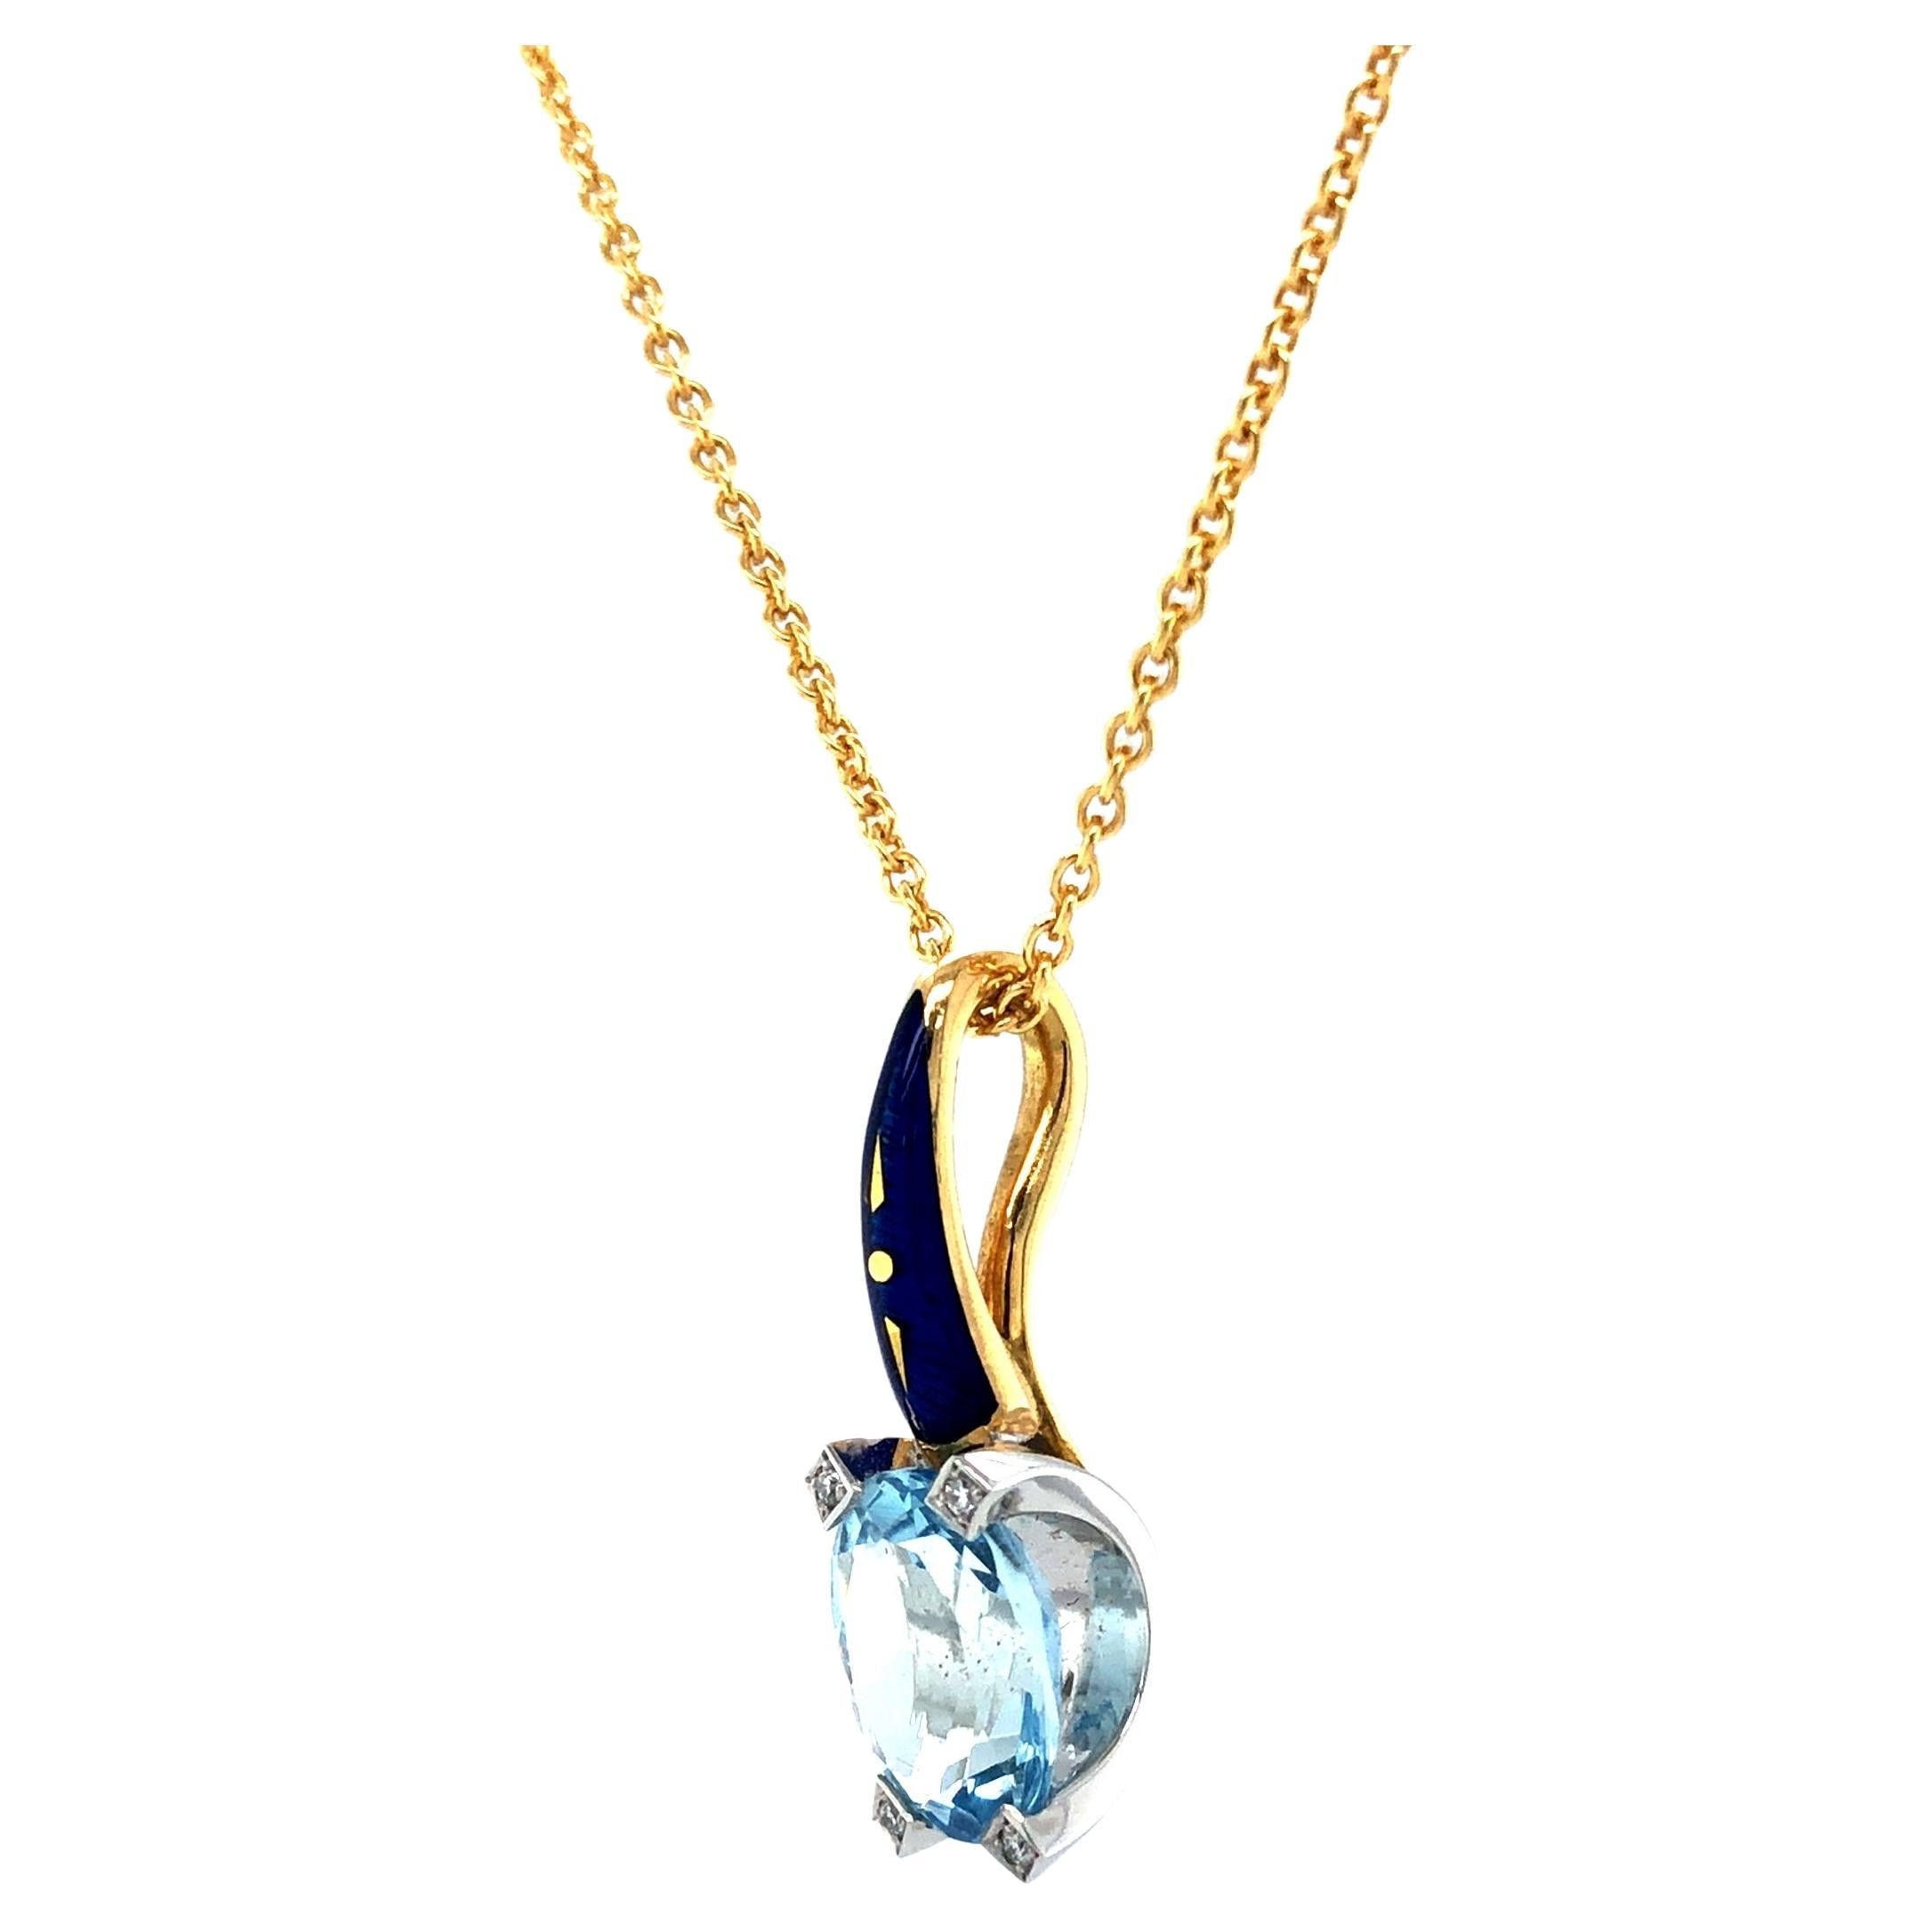 Victor Mayer pendant necklace 18k yellow gold white gold, Cocktail collection, royal blue vitreous enamel, 5 diamonds 0.03 ct G VS brilliant cut, facetted oval Aquamarine

About the creator Victor Mayer
Victor Mayer is internationally renowned for